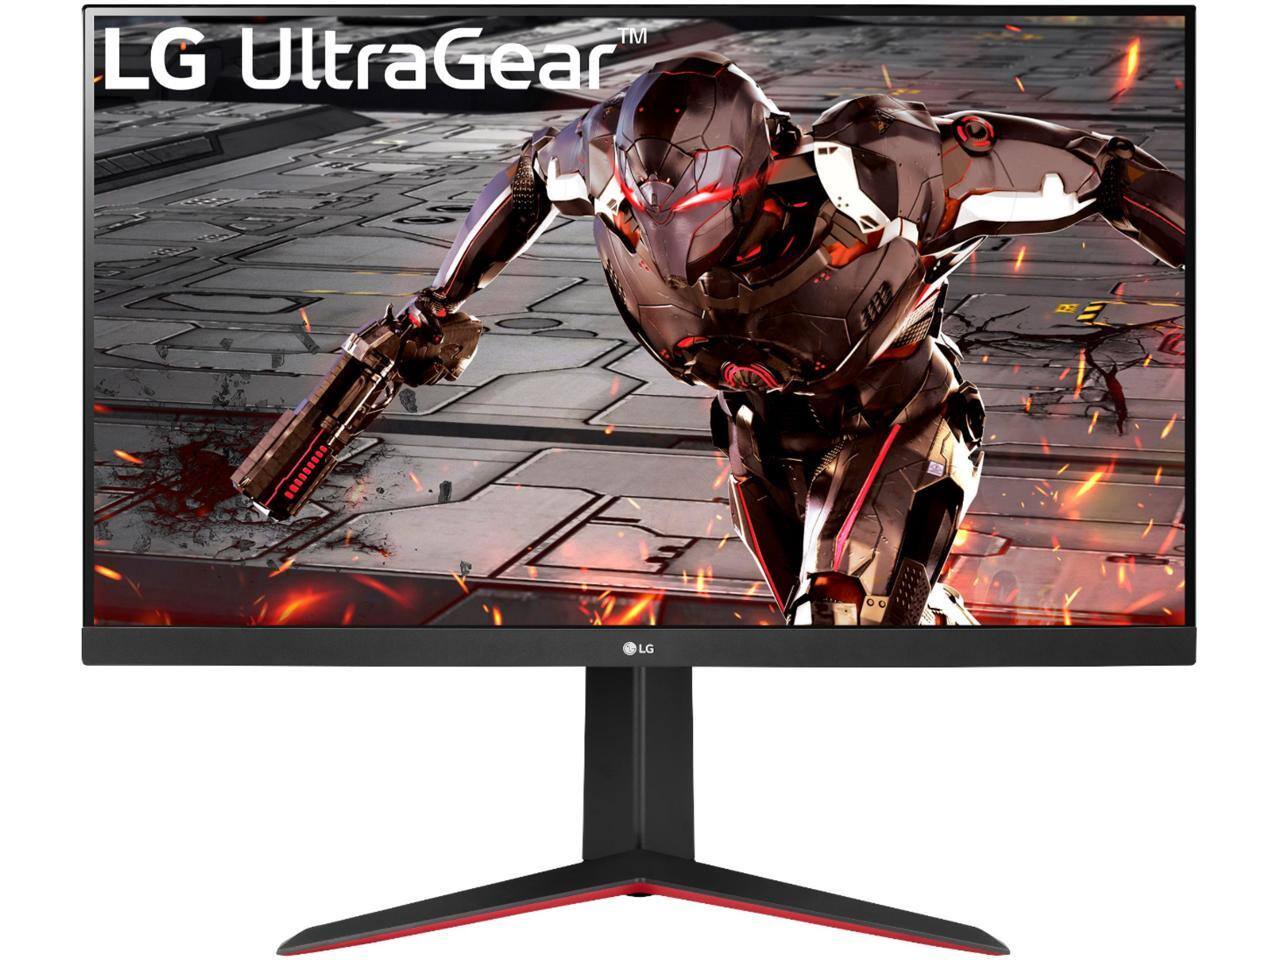 LG 32" (31.5" Viewable) 32GN650-B UltraGear QHD 2560 x 1440 1ms 165Hz HDR10 Gaming Monitor with FreeSync Premium for $296.99 w/ Free Shipping